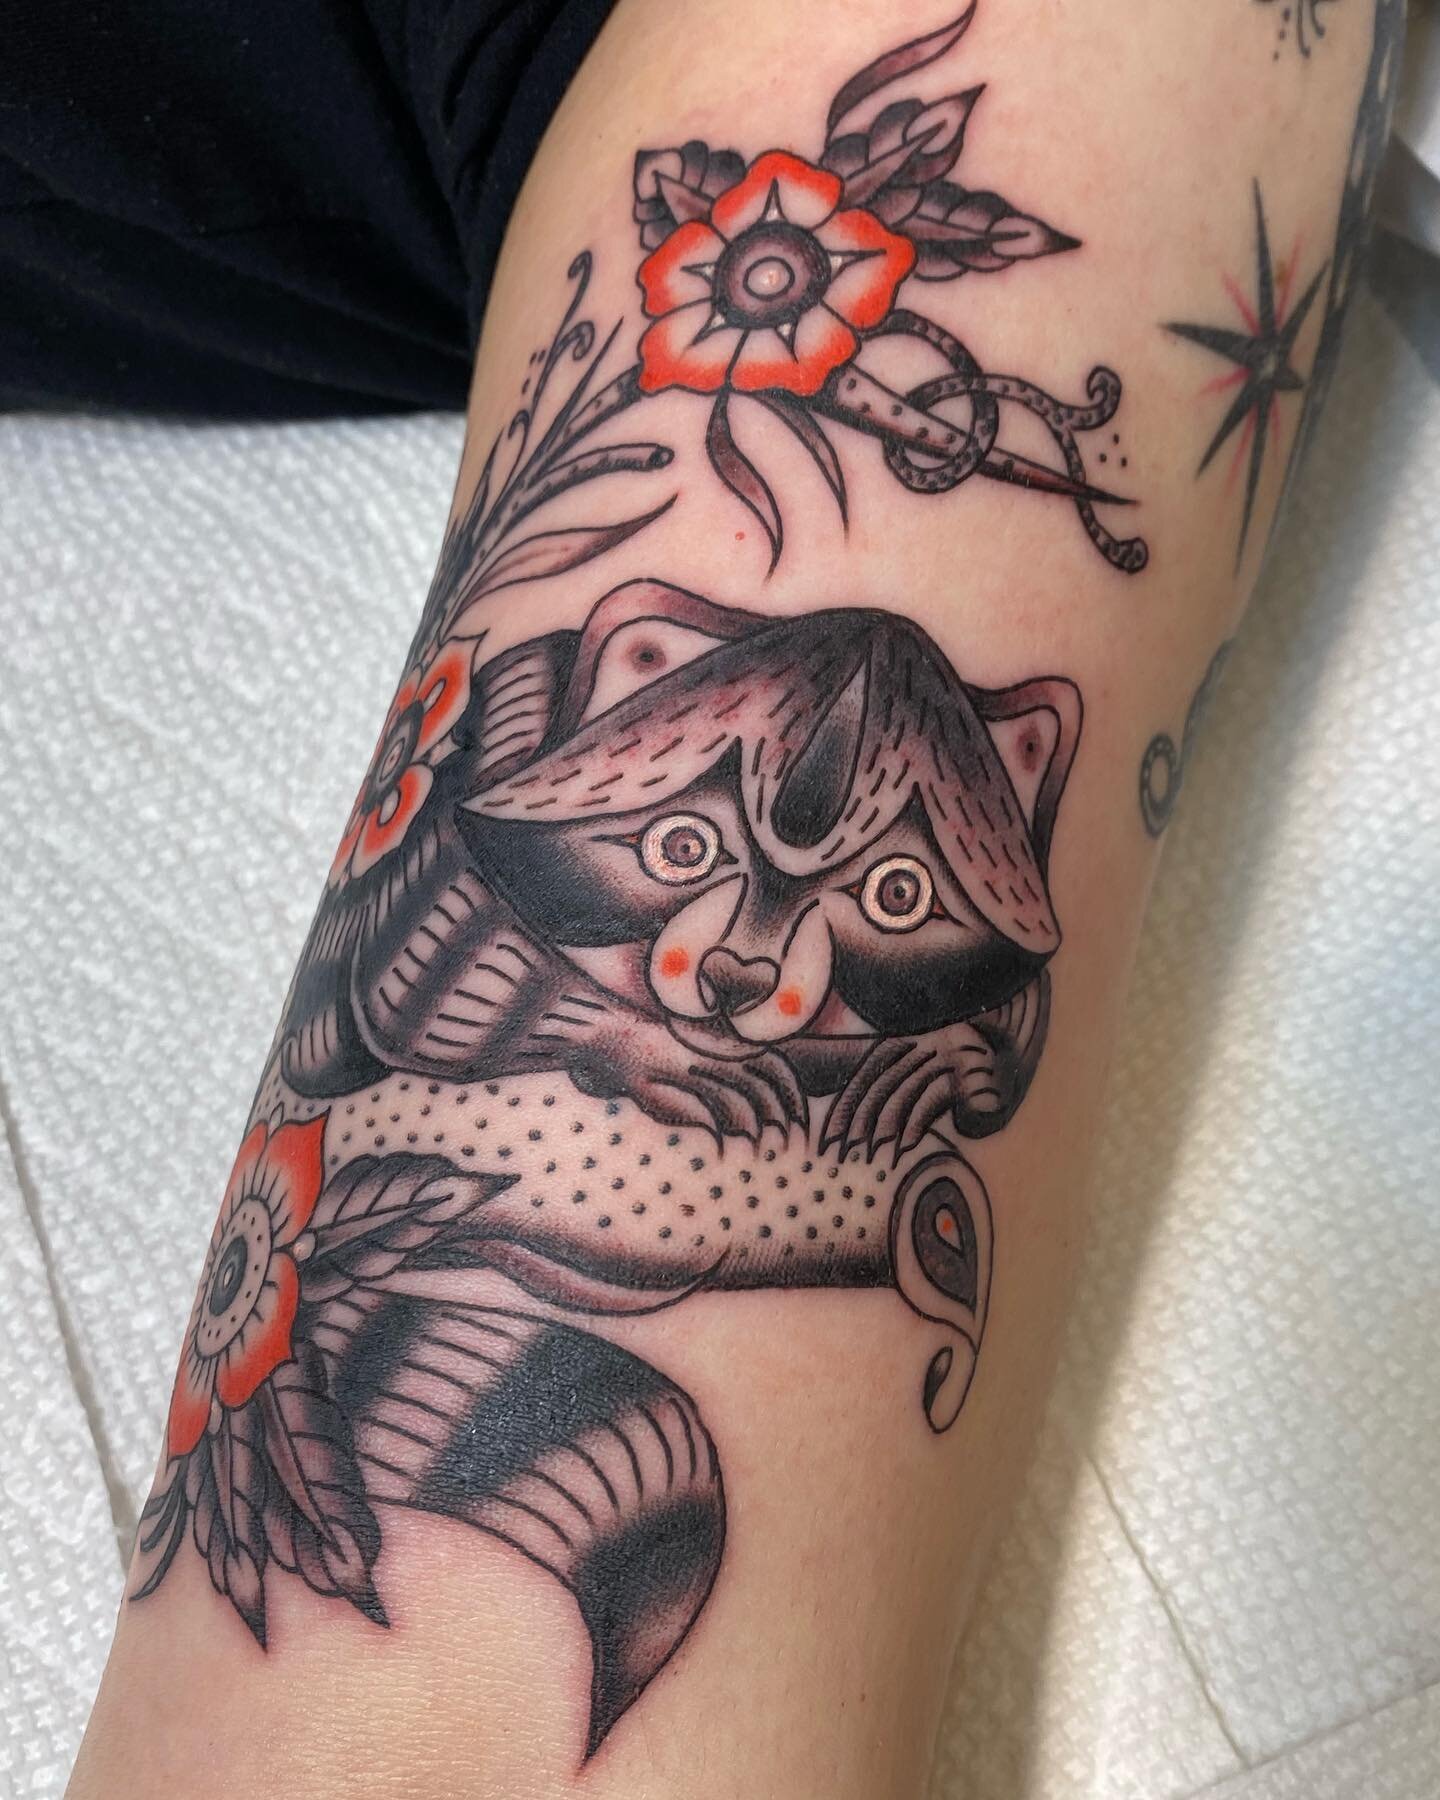 Seattle! A have some last minute cancellations at @36thstreettattoo -today Wednesday and Friday. DM me to get tattooed ✨ flash would be ideal! 🦋🦋🦋
 
[little Racoon  with flowers, in black, grey and red, from my book.] thanks Candace!